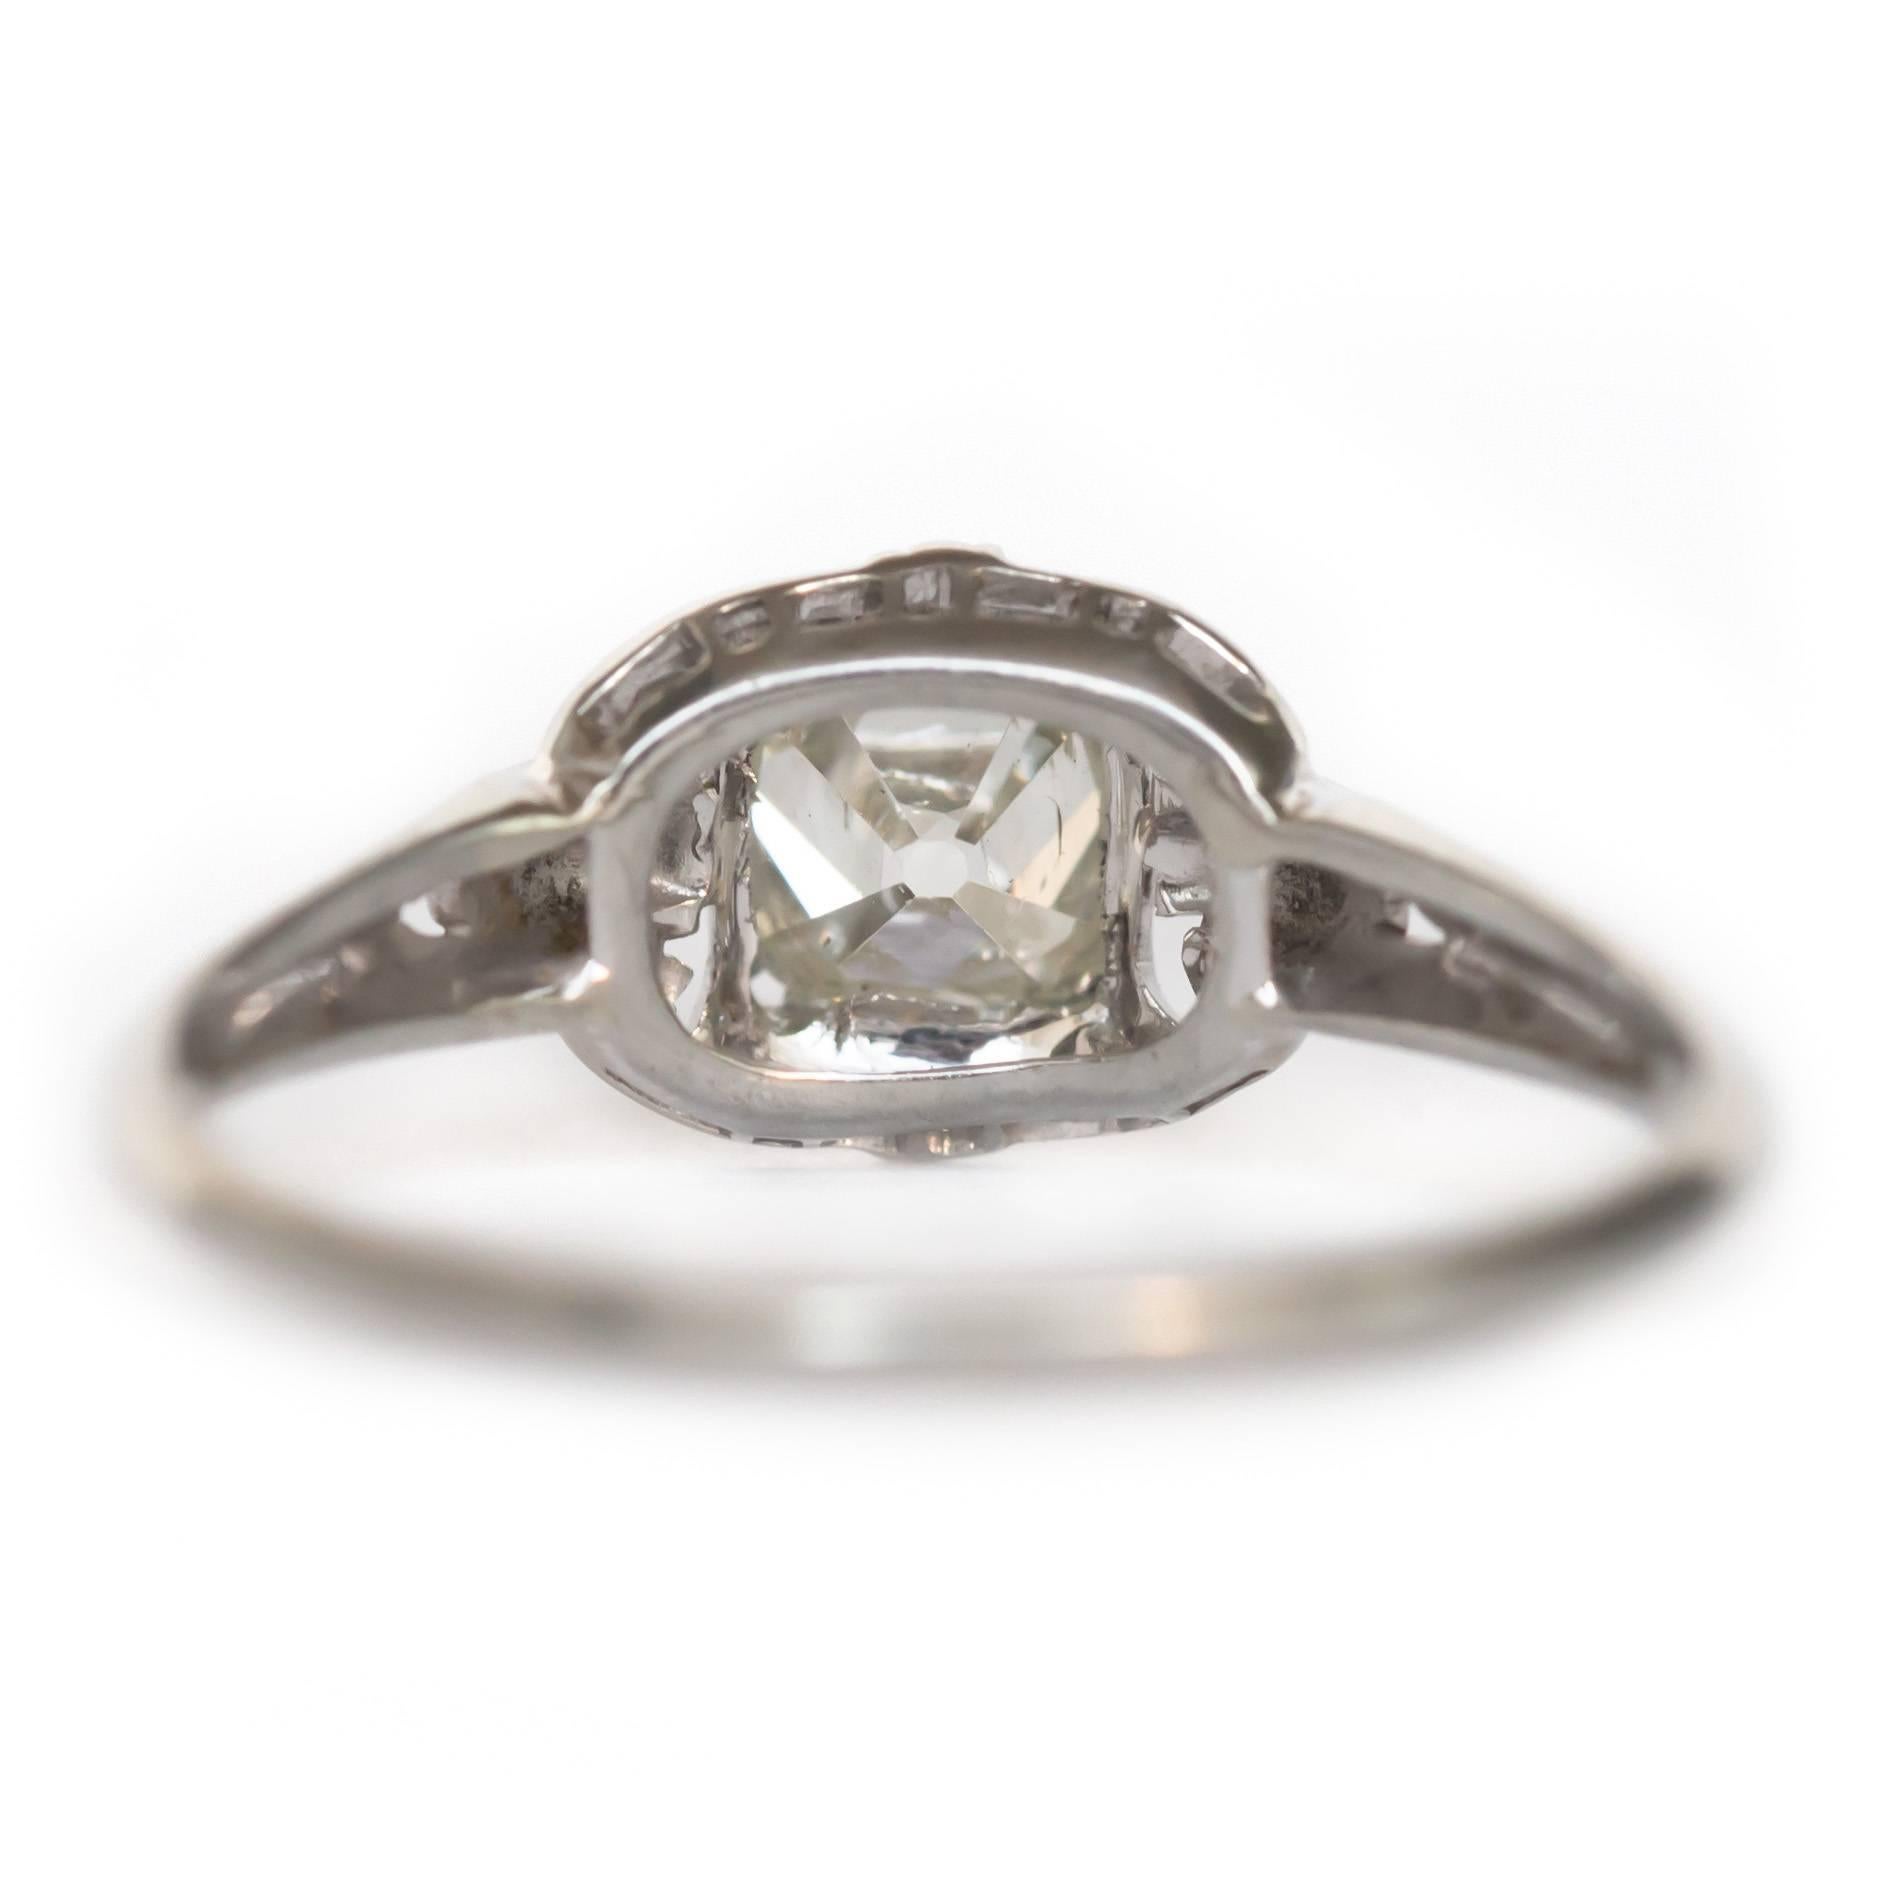 GIA Certified 0.57 Carat Diamond White Gold Engagement Ring In Excellent Condition For Sale In Atlanta, GA